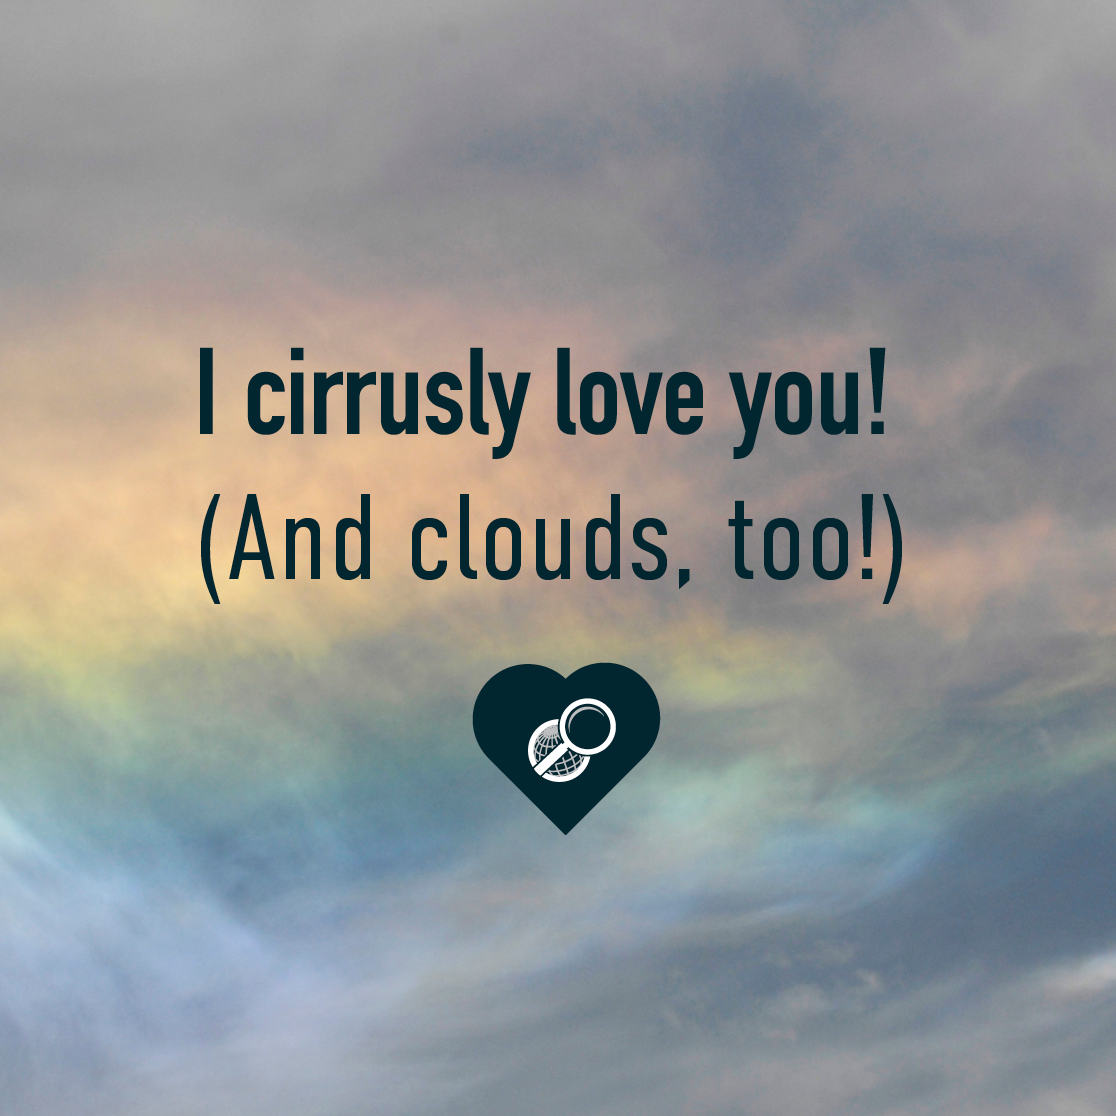 "I cirrusly love you! (And clouds too!) on a background of a sky with clouds.